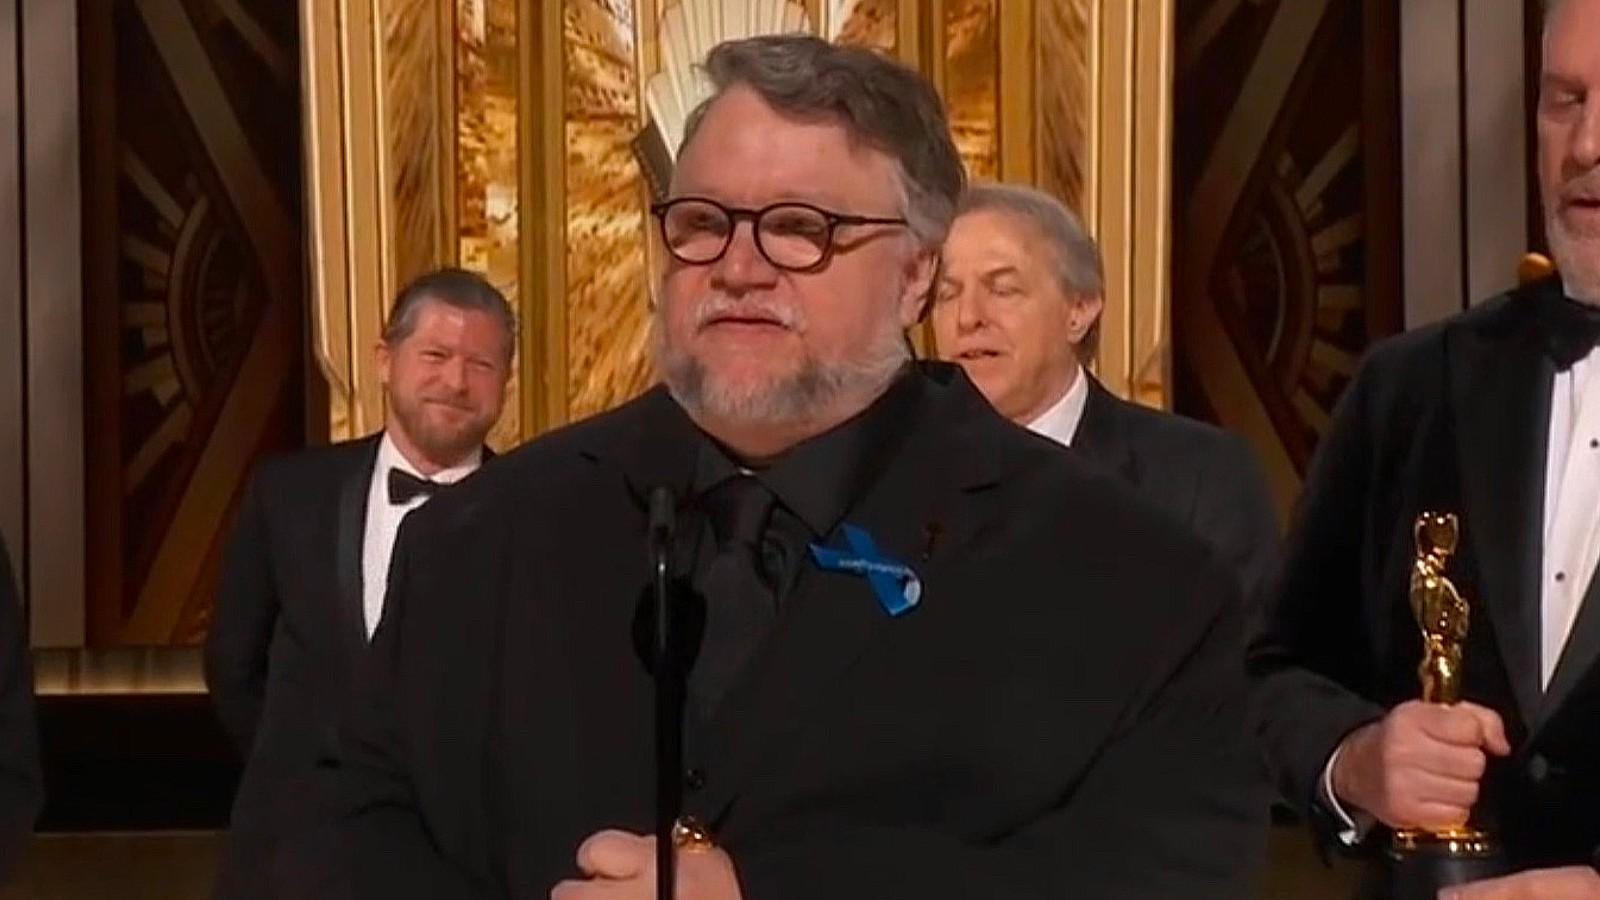 Guillermo del Toro wearing a blue ribbon at the Oscars